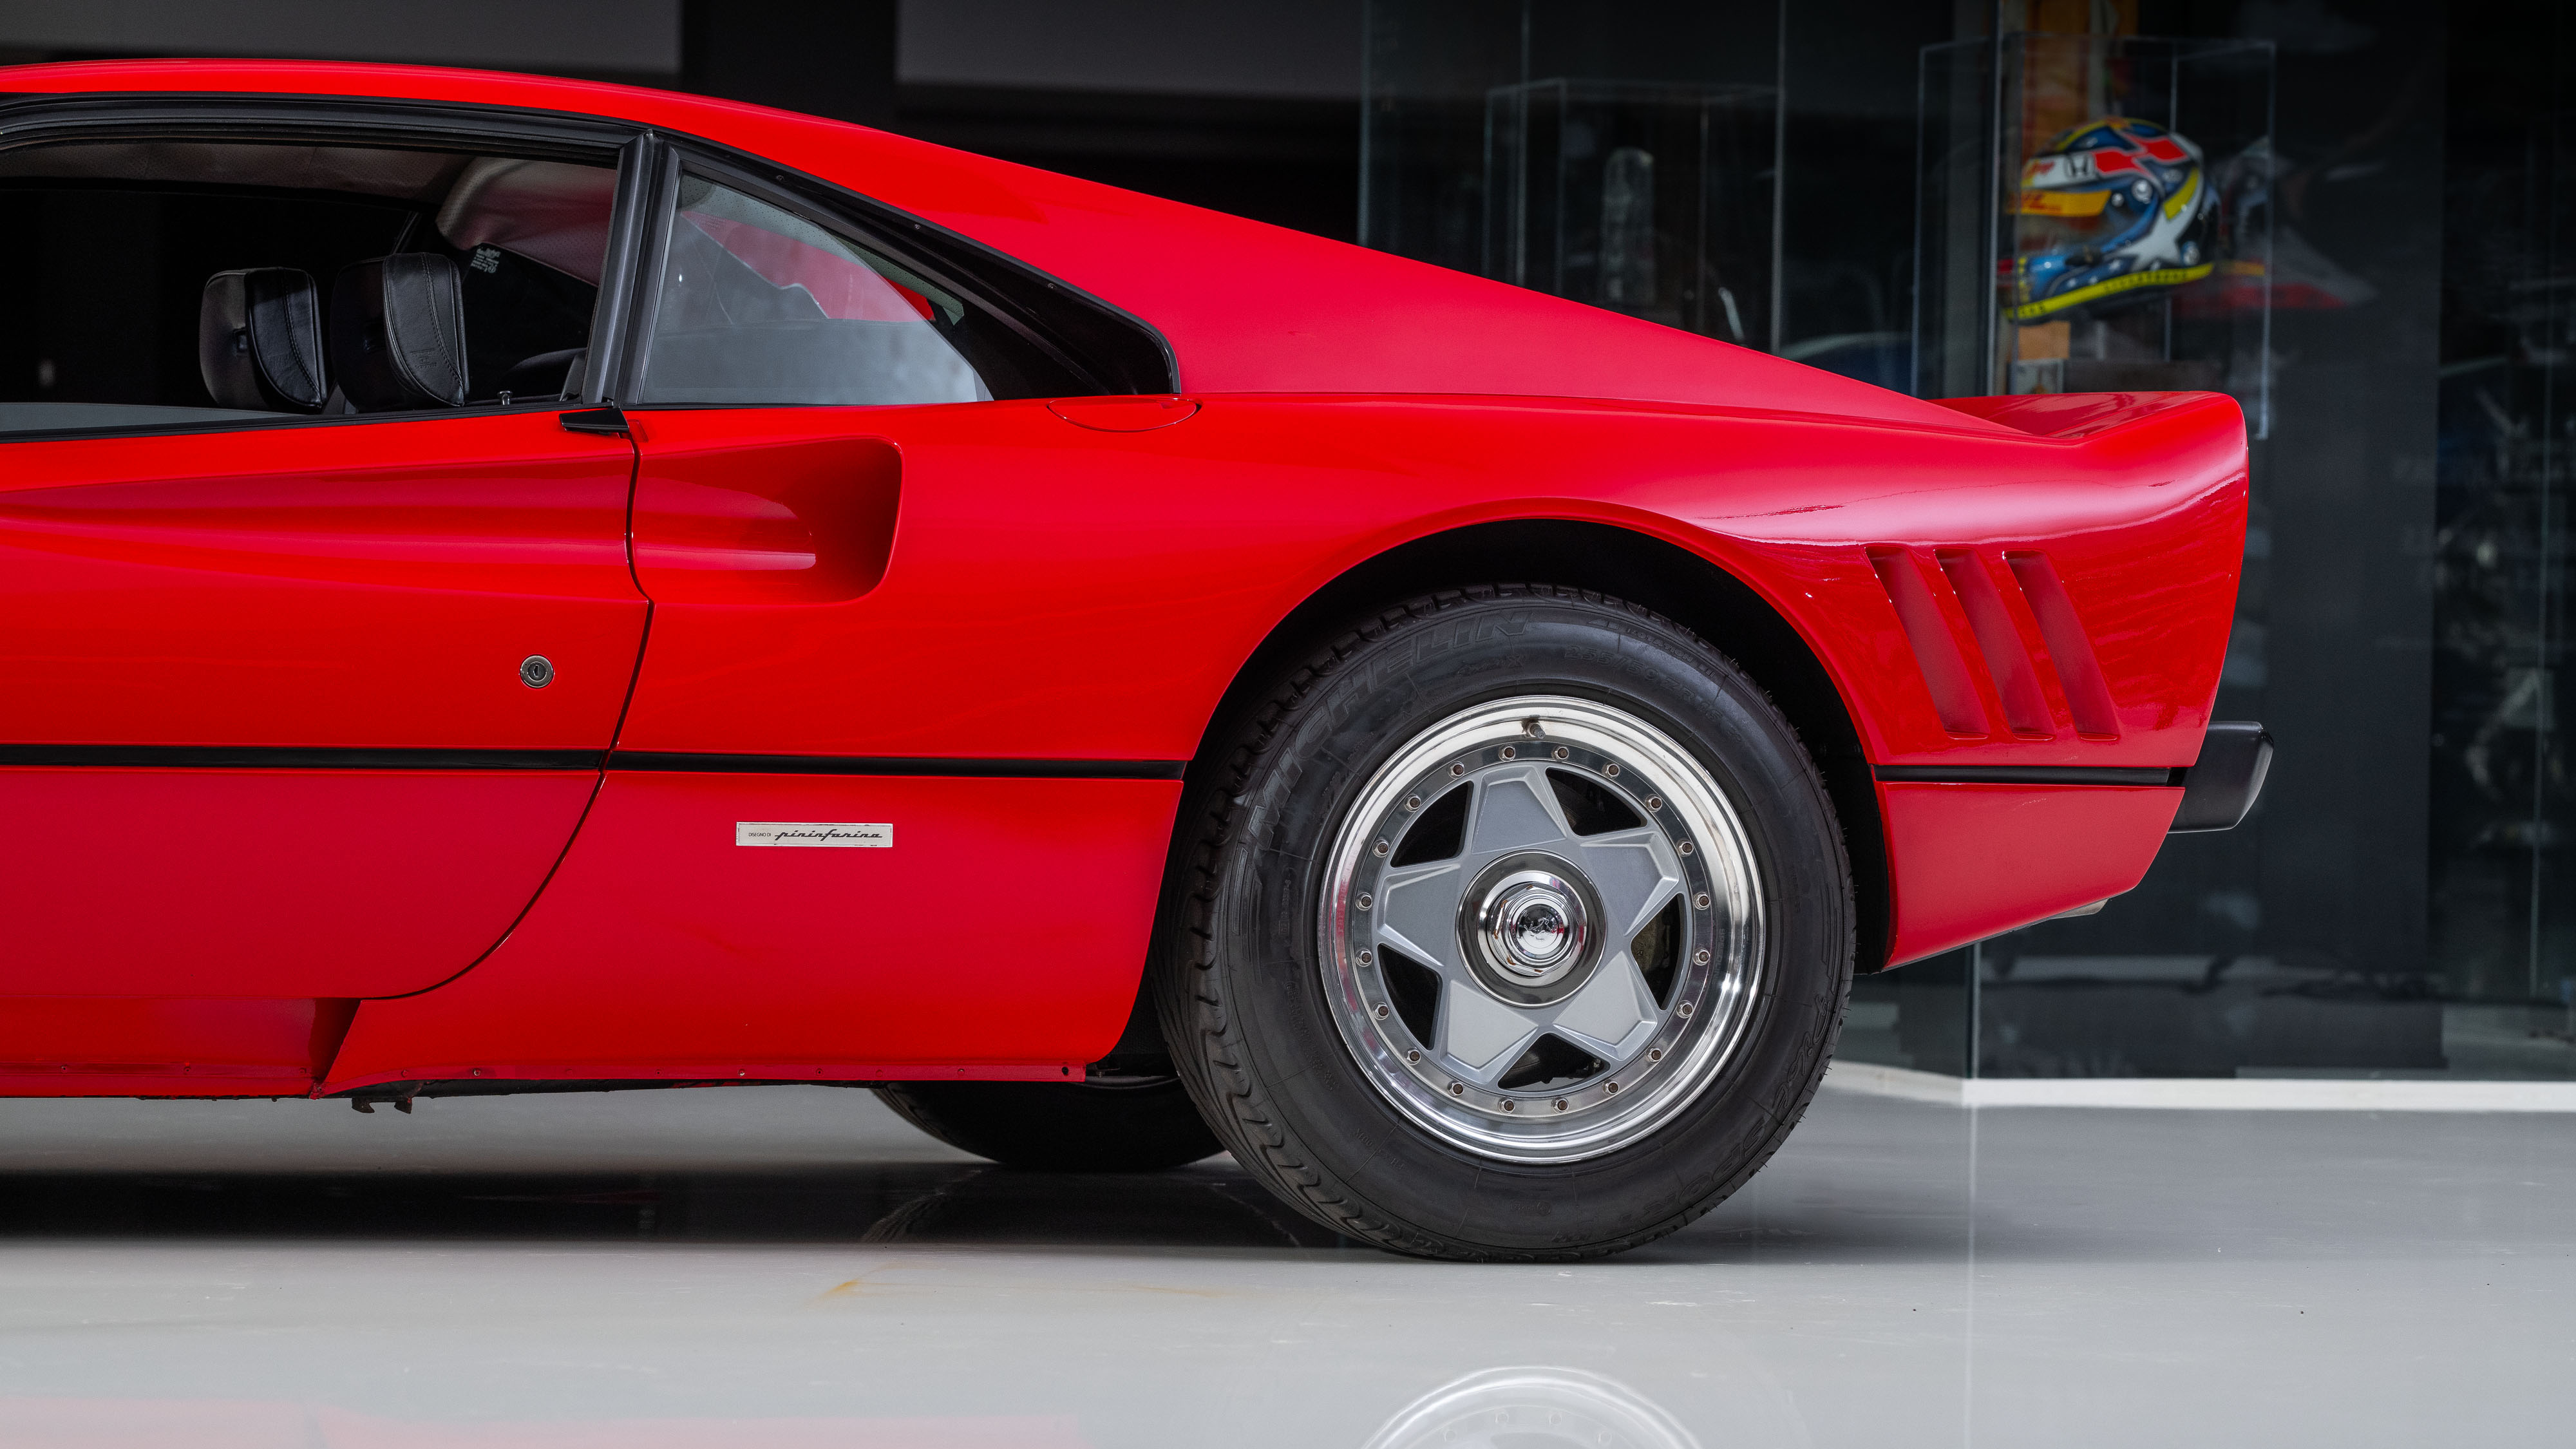 would you rather buy 200 dacia springs or this ferrari 288 gto?